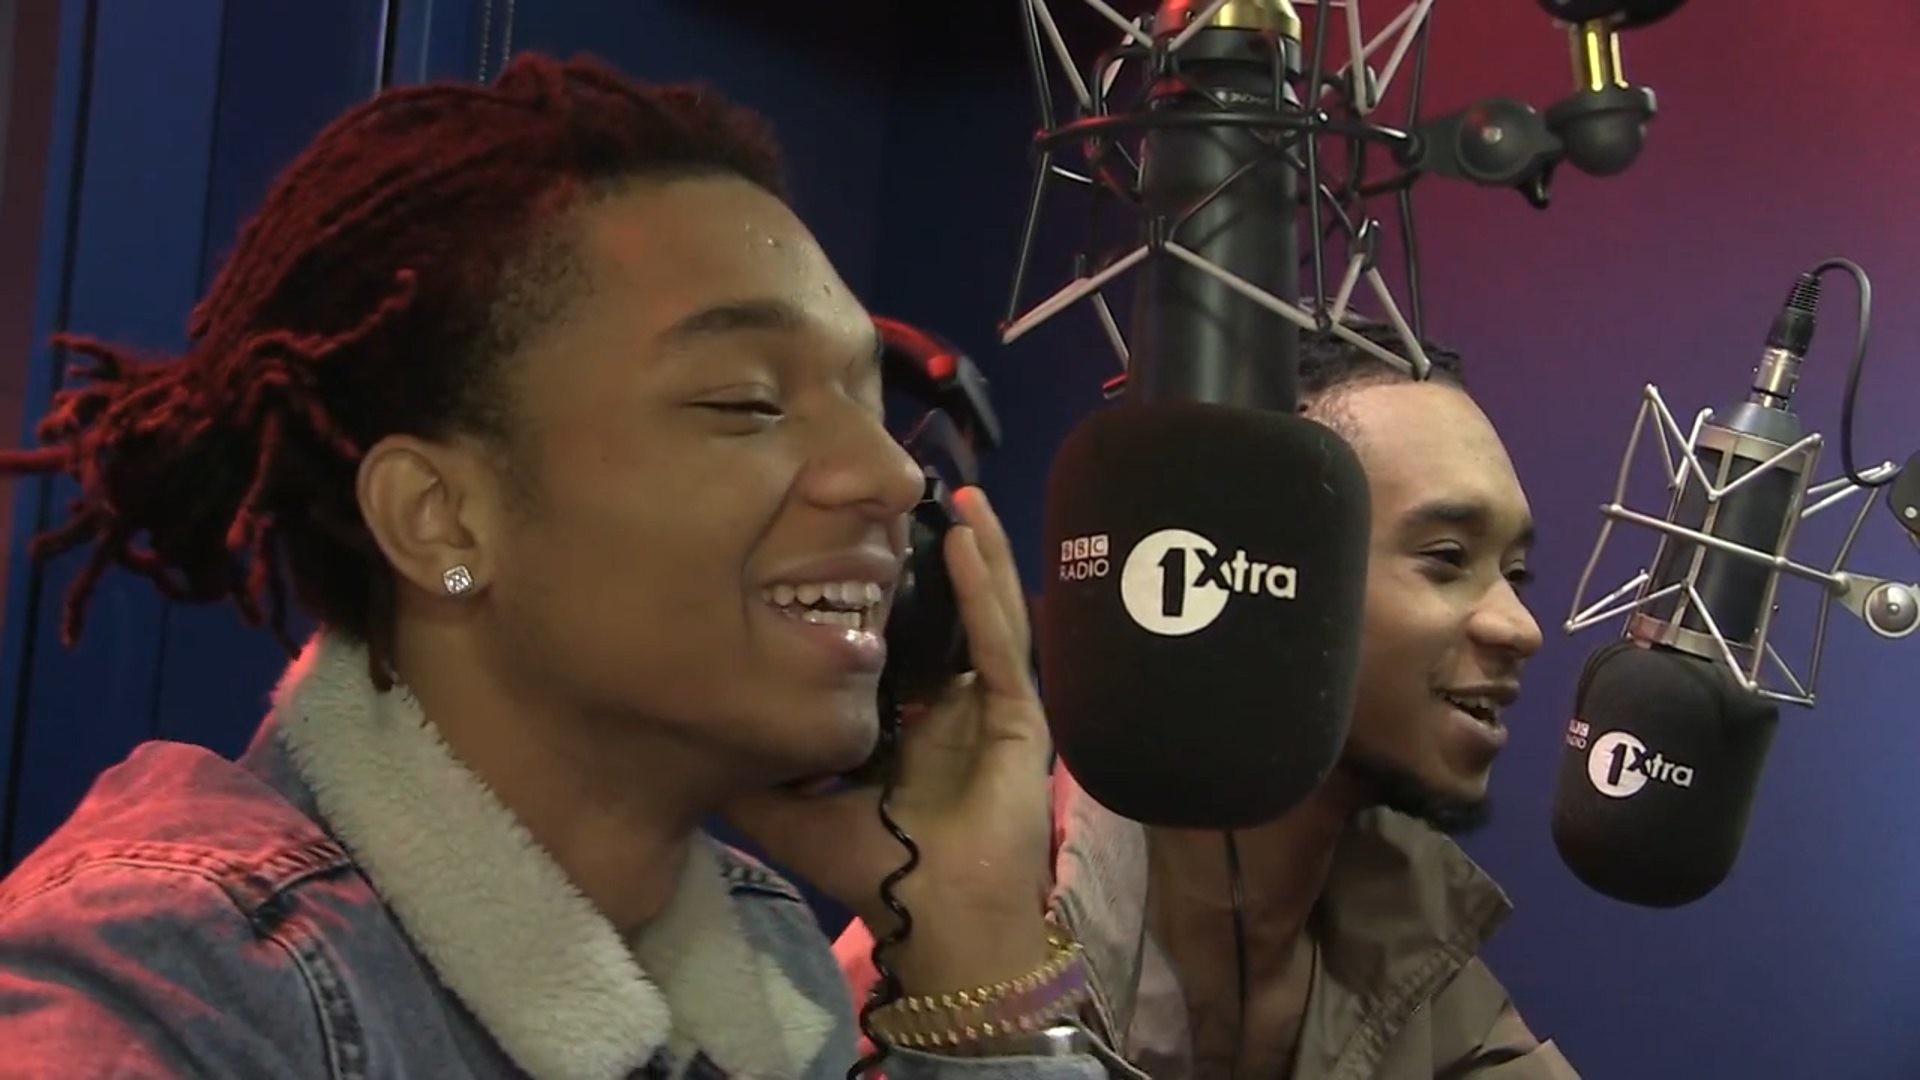 1920x1080 BBC Radio 1 - 1Xtra's Rap Show with Charlie Sloth, Isaiah Dreads & Rae  Sremmurd, Fire In The Booth - Isaiah Dreads